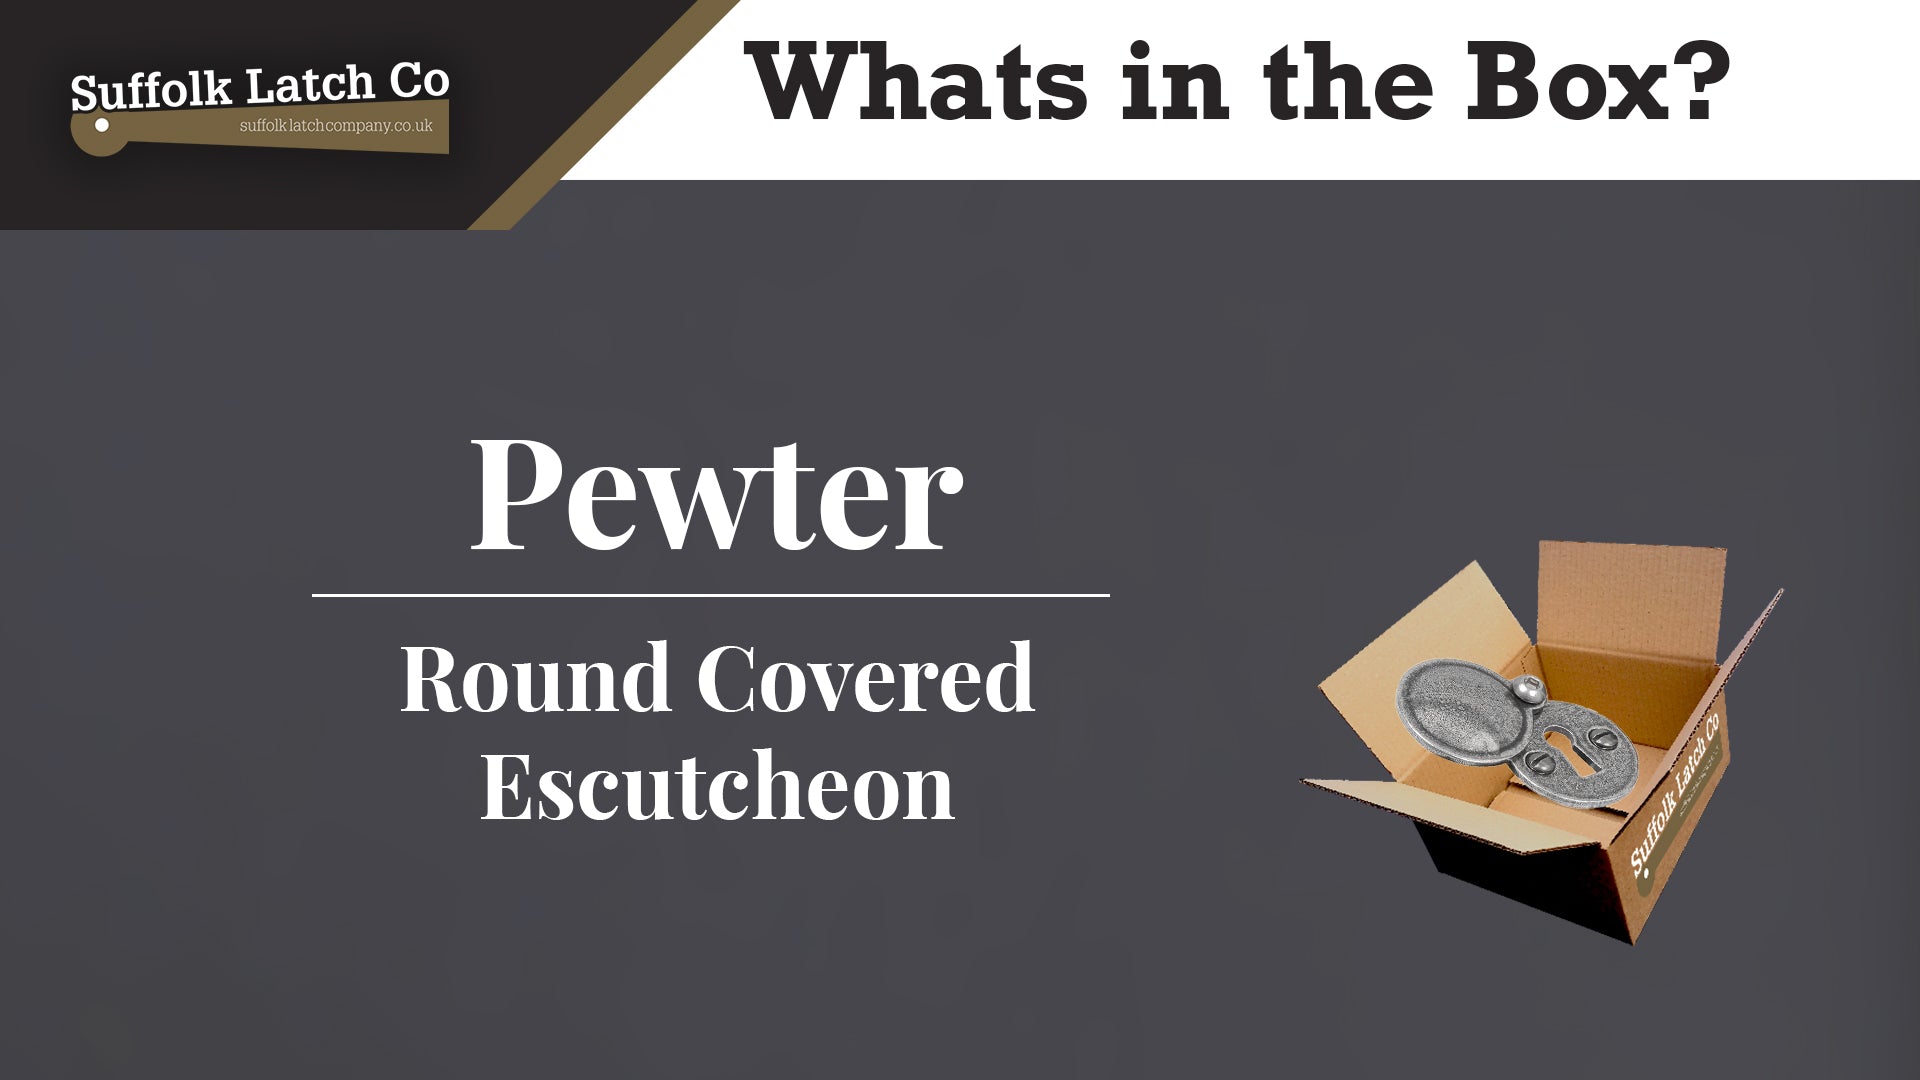 What's in the box? Pewter Round Covered Escutcheon